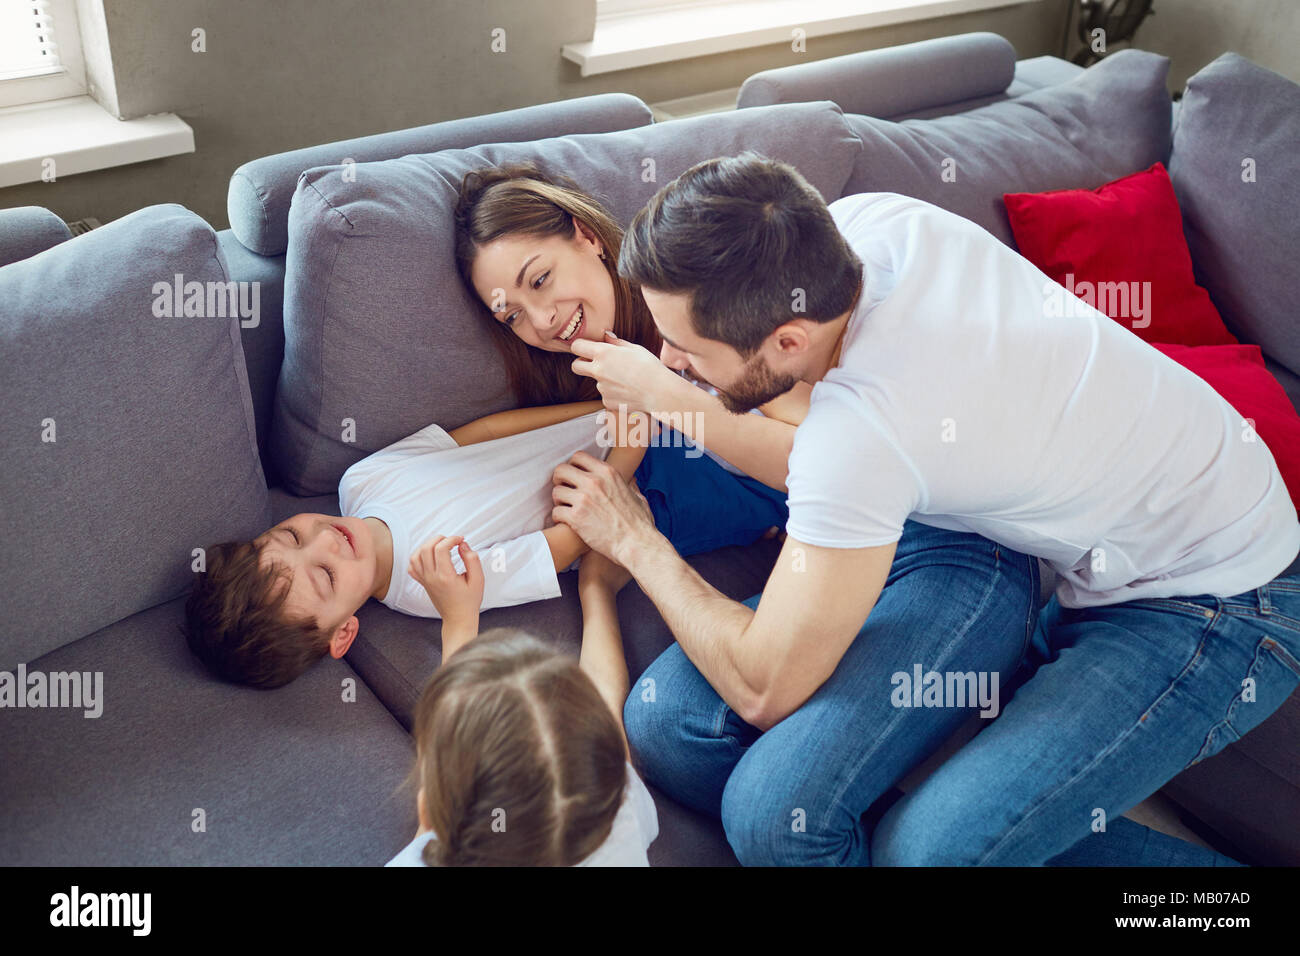 Cheerful family playing together in a room. Stock Photo